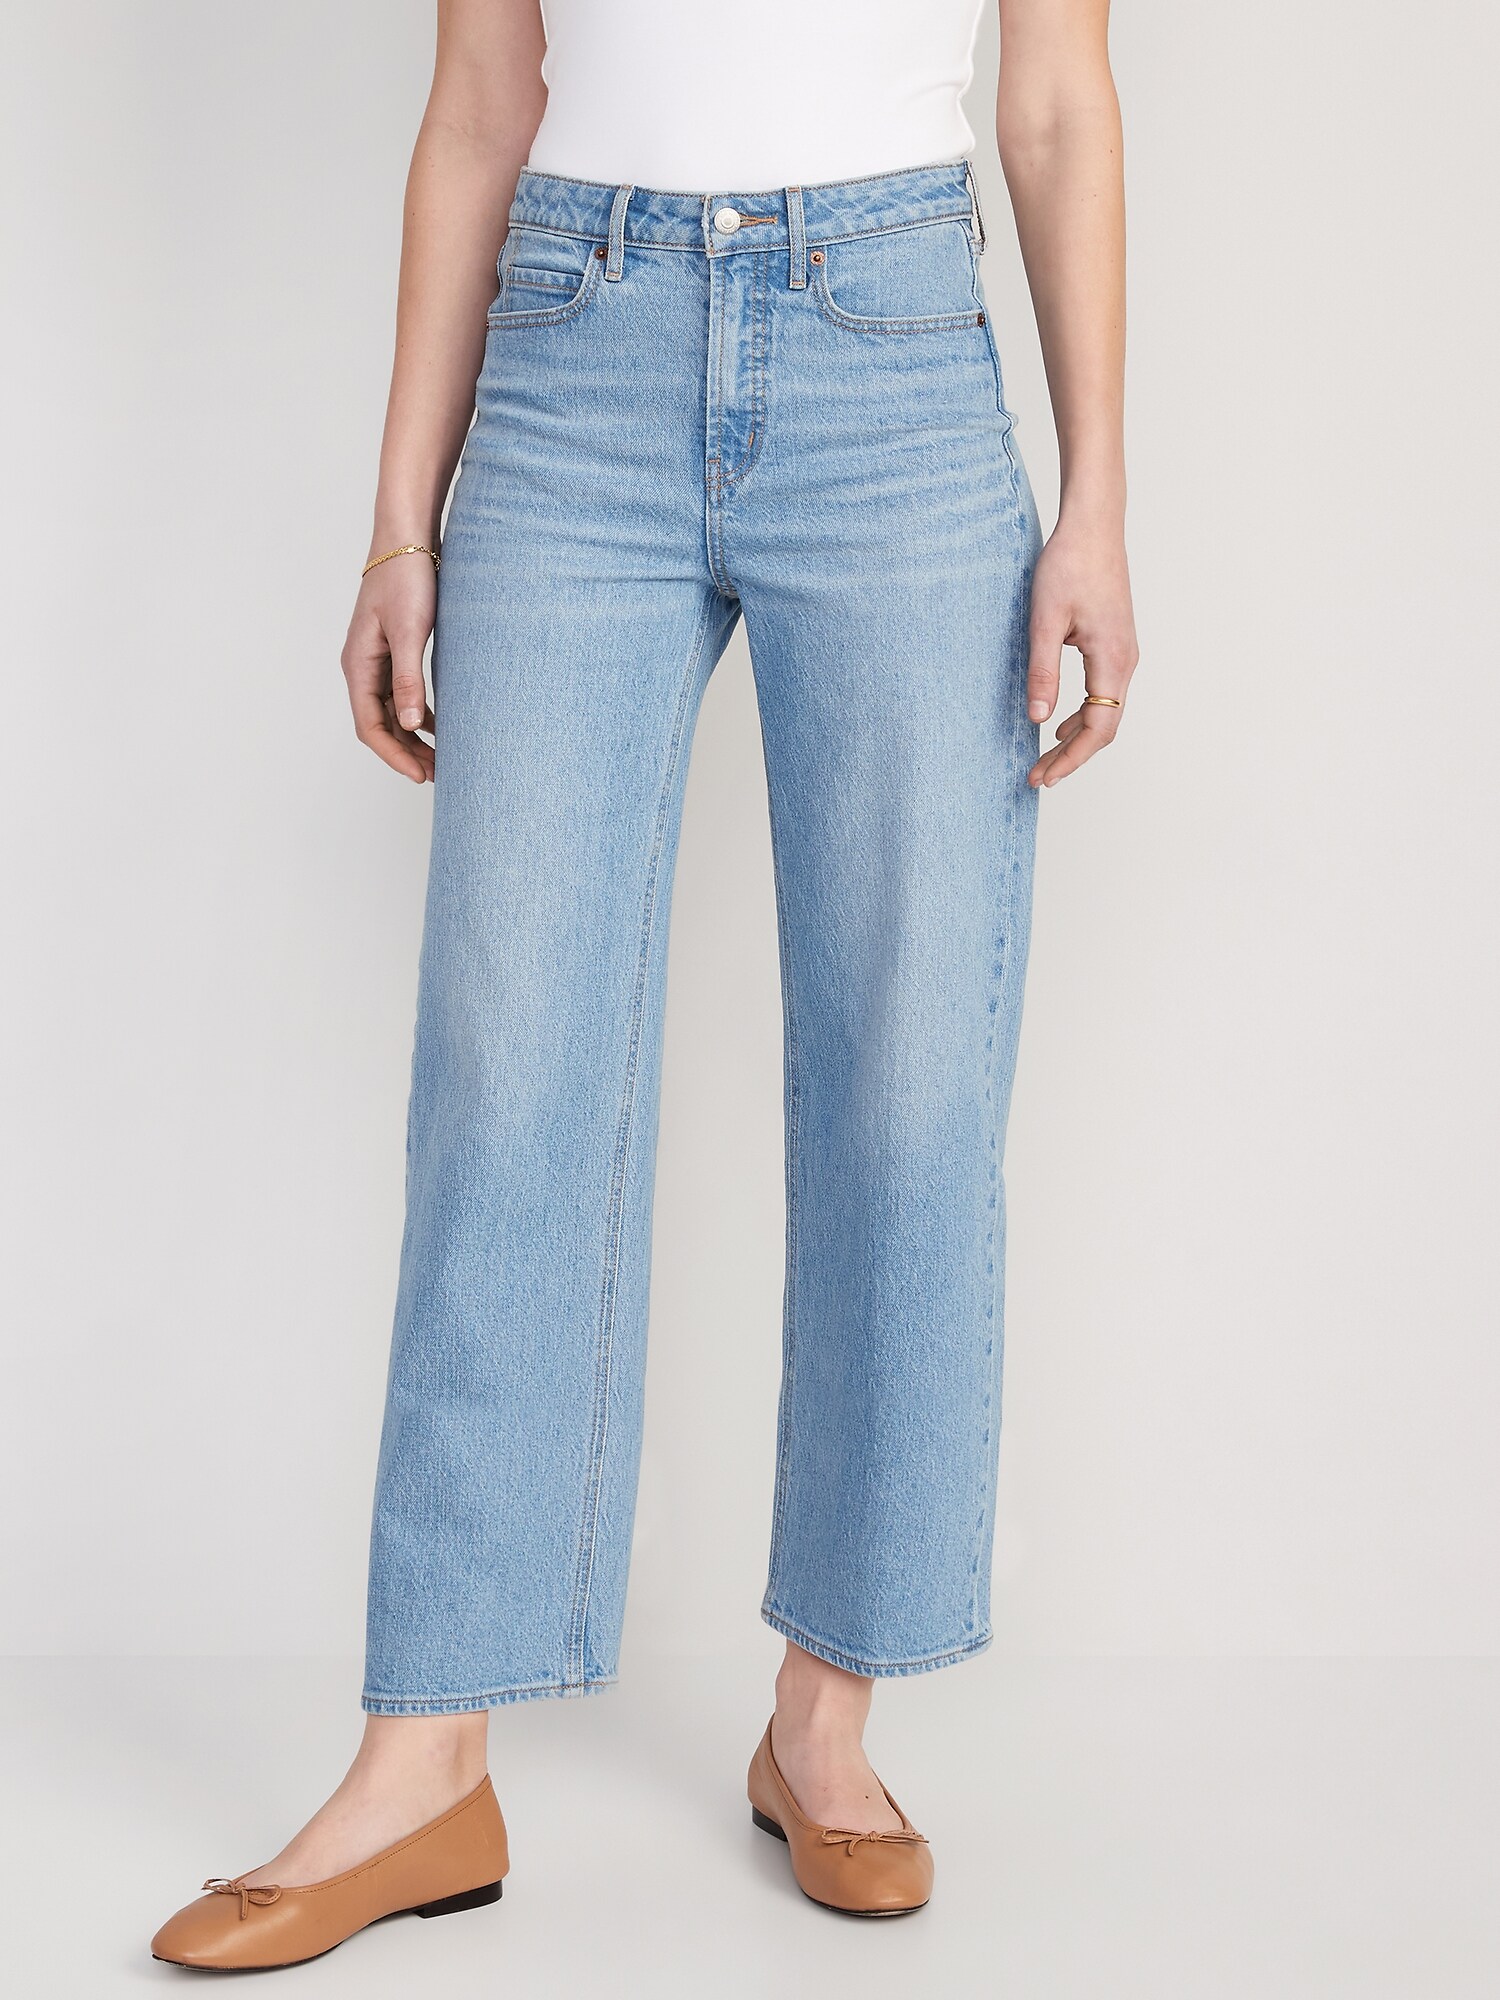 Cropped Jeans for Women, Womens Jeans